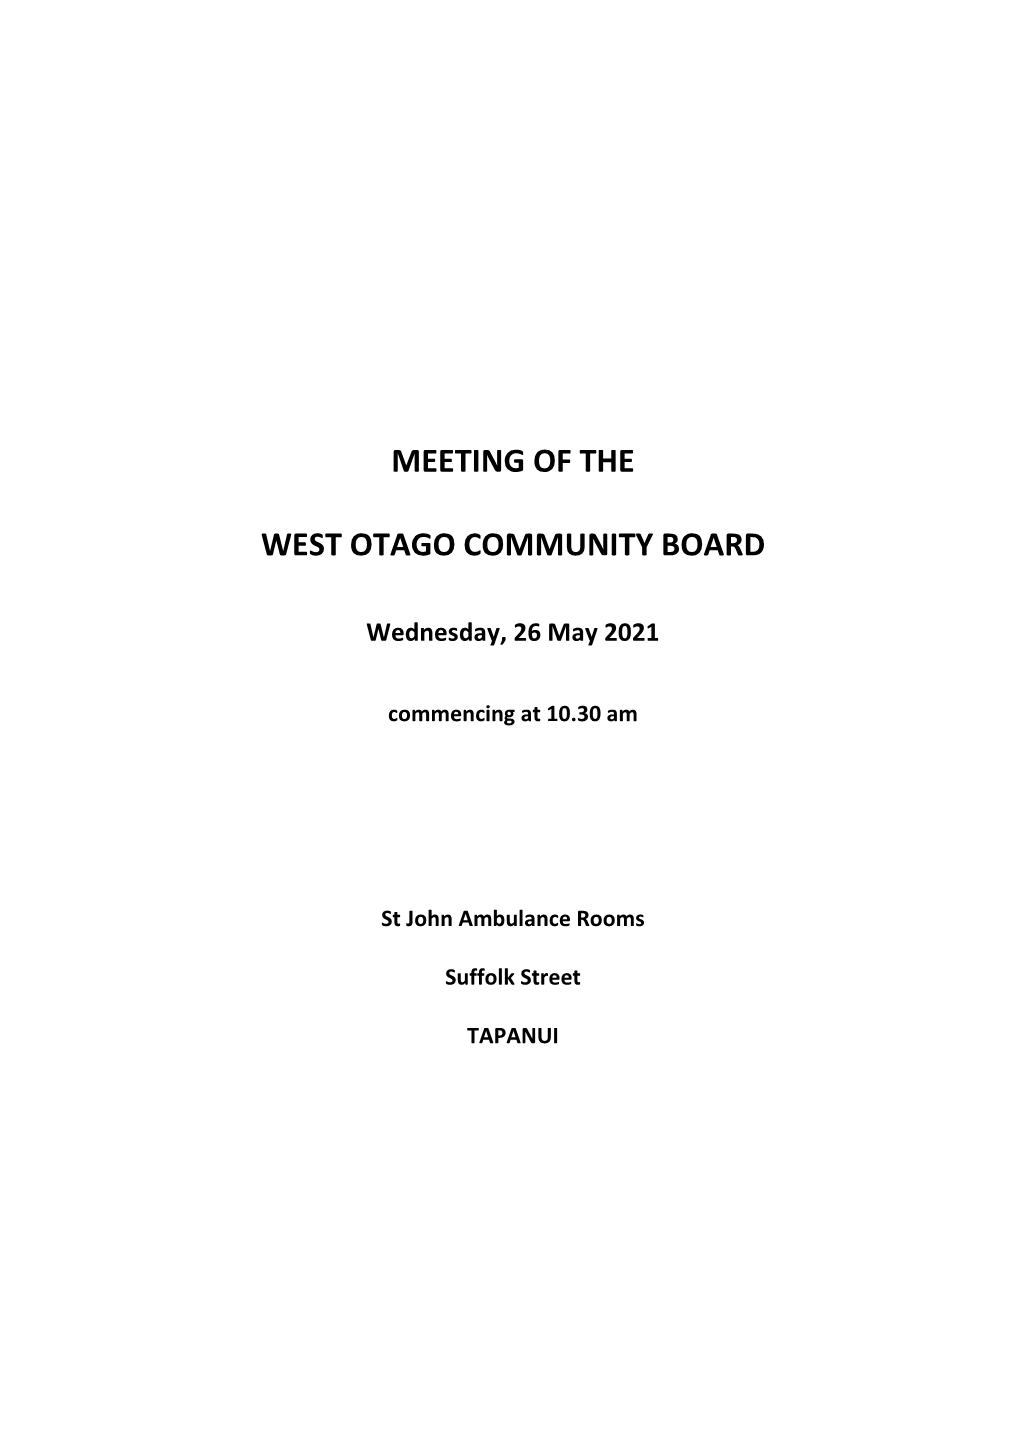 Meeting of the West Otago Community Board Will Be Held in the St John Ambulance Rooms, Suffolk Street, Tapanui on Wednesday, 26 May 2021, Commencing at 10.30 Am